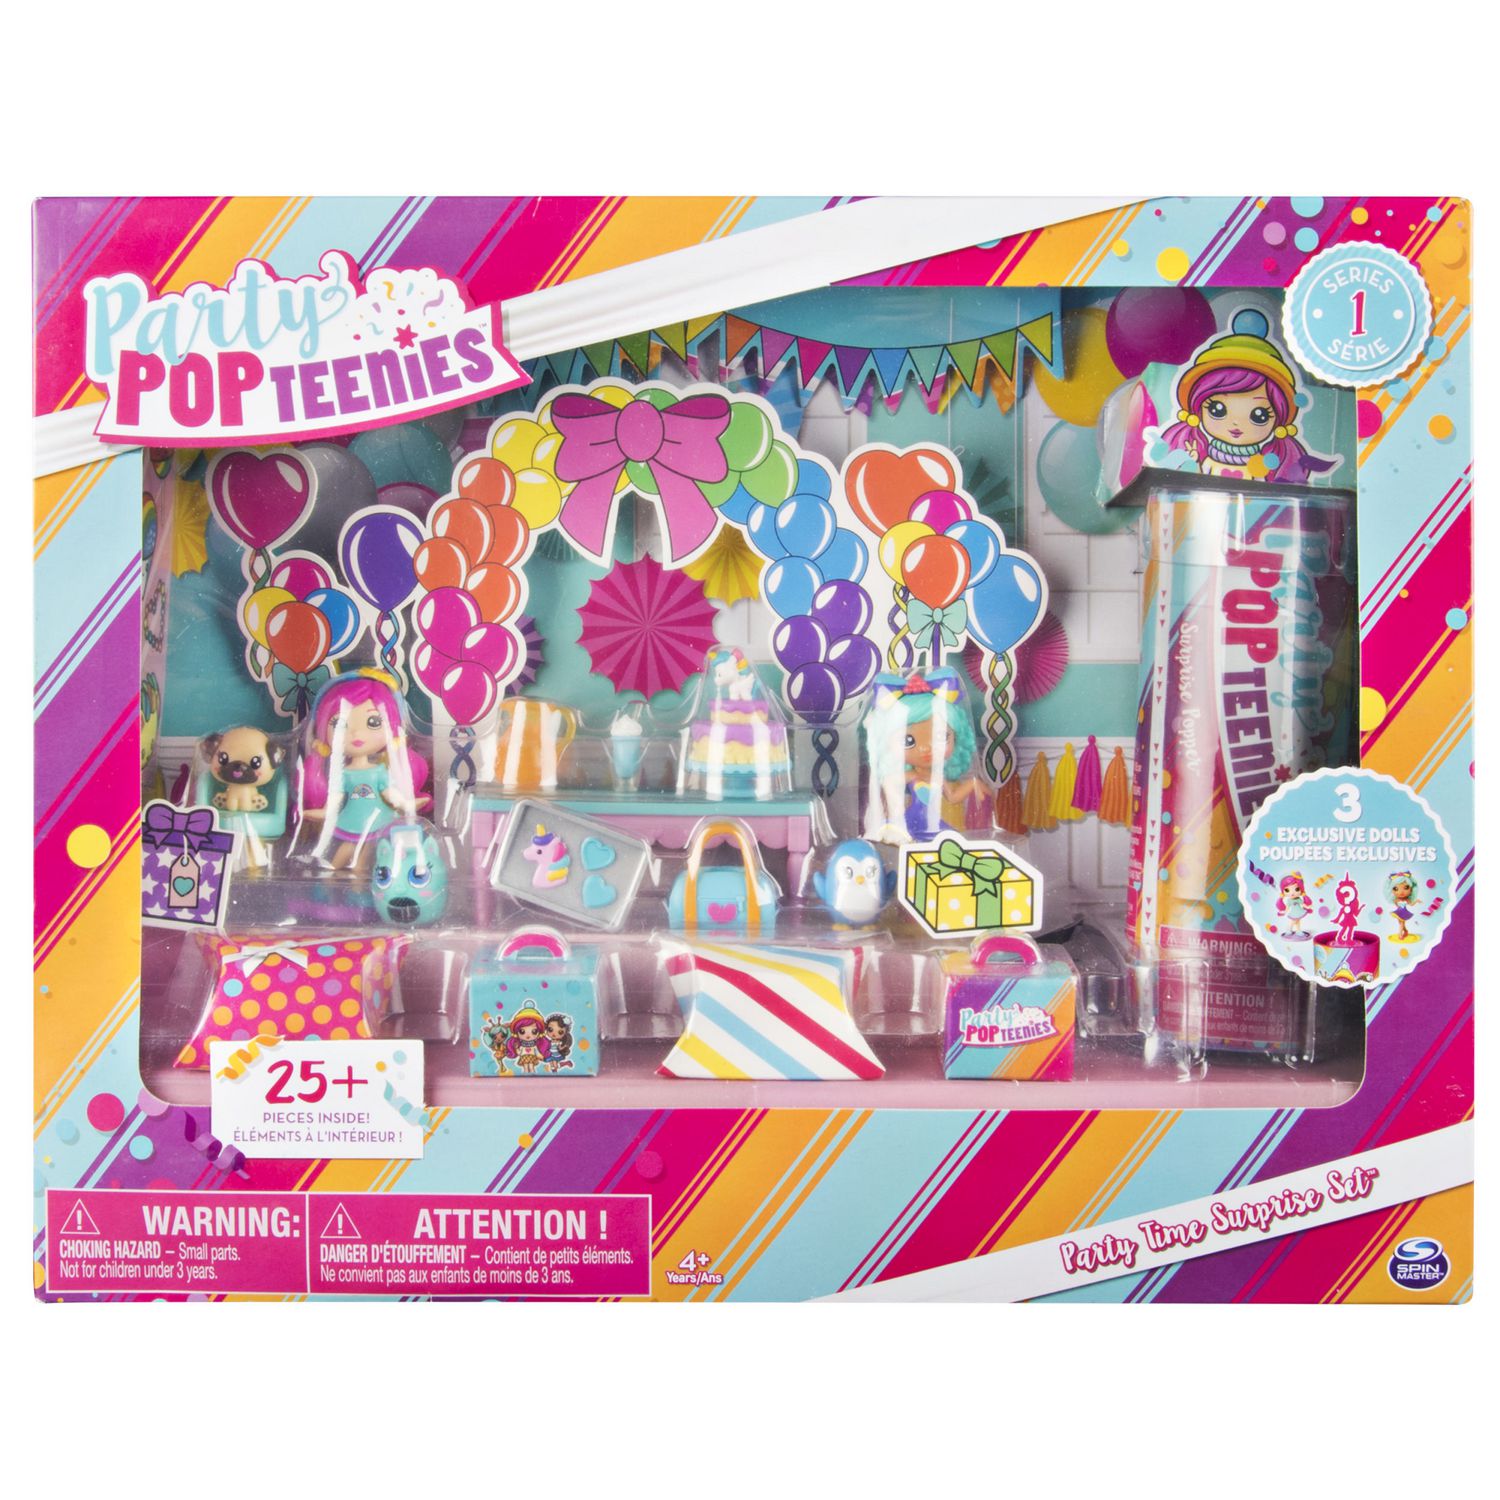 New Girl's Party Popteenies Party Time Baby Surprise Set Toys For Kids Children 